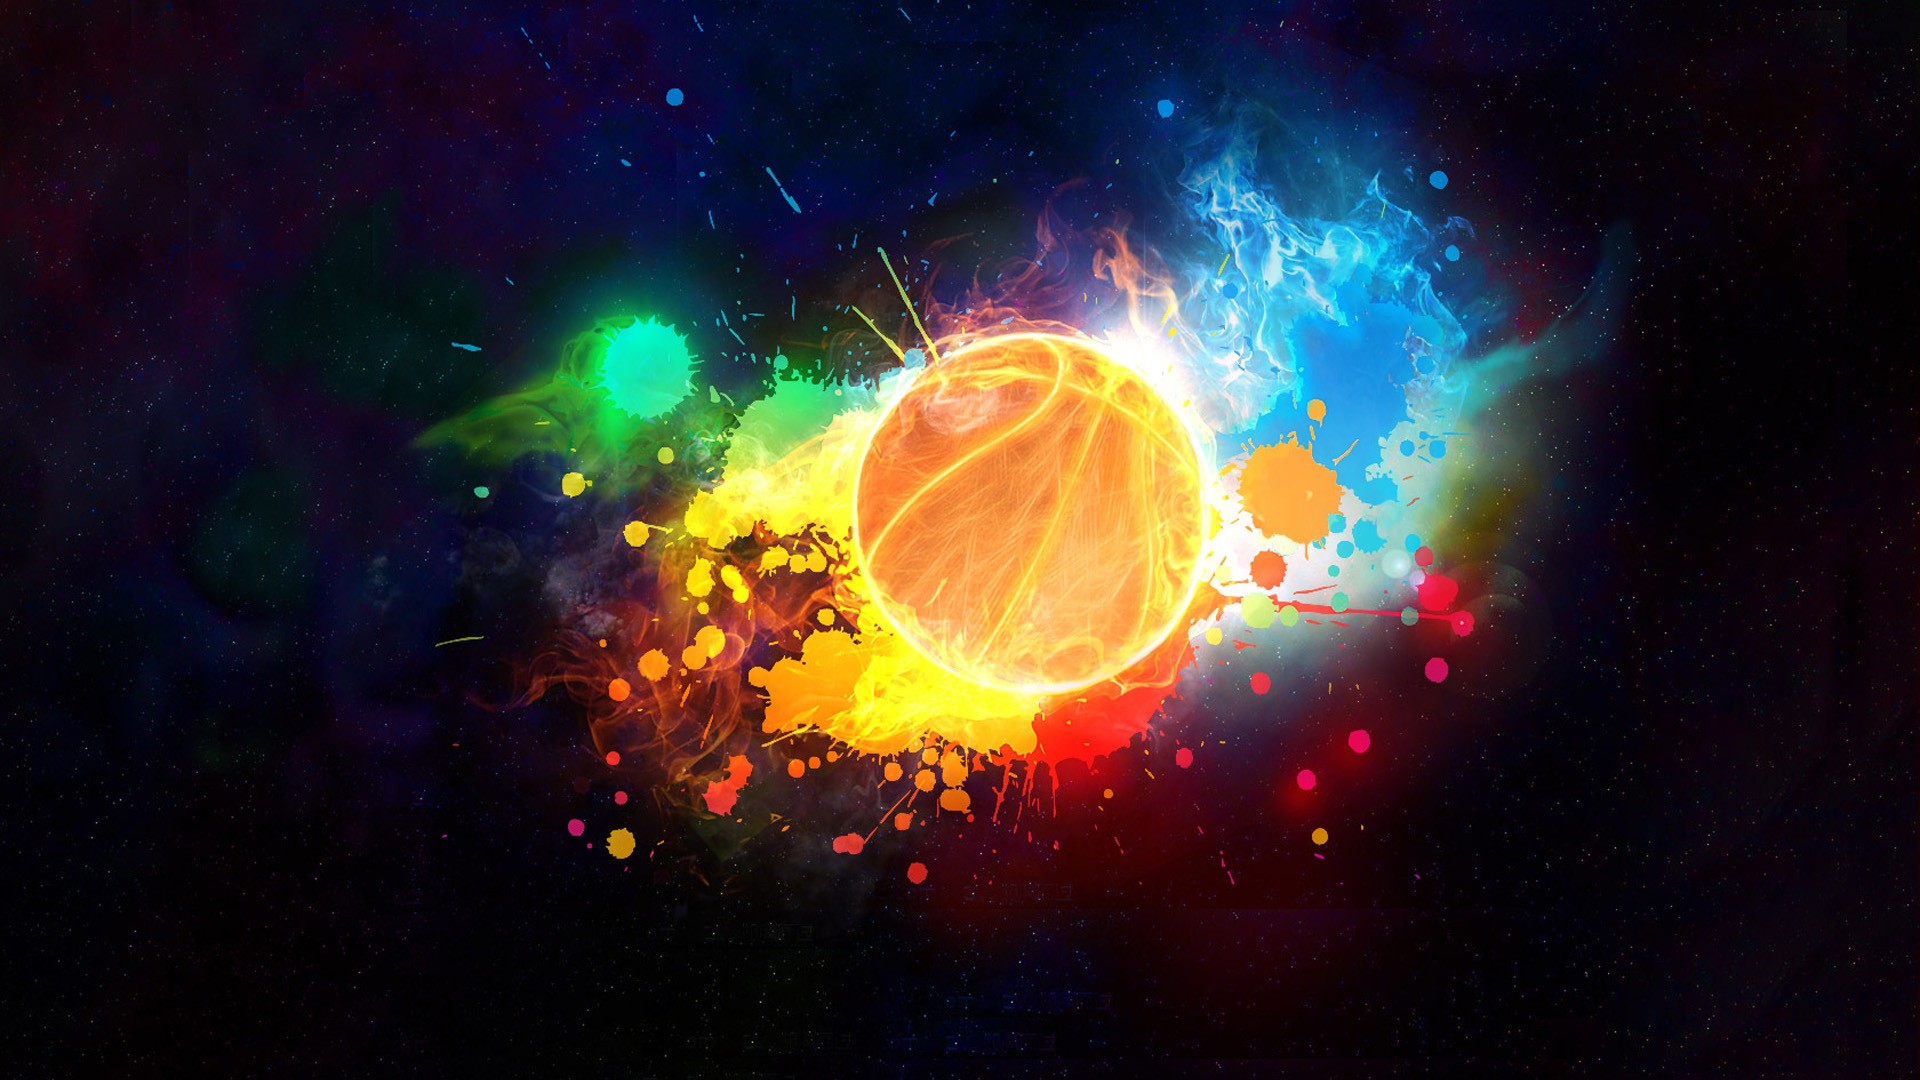 HD Desktop Wallpaper Basketball Games with image dimensions 1920x1080 pixel. You can make this wallpaper for your Desktop Computer Backgrounds, Windows or Mac Screensavers, iPhone Lock screen, Tablet or Android and another Mobile Phone device